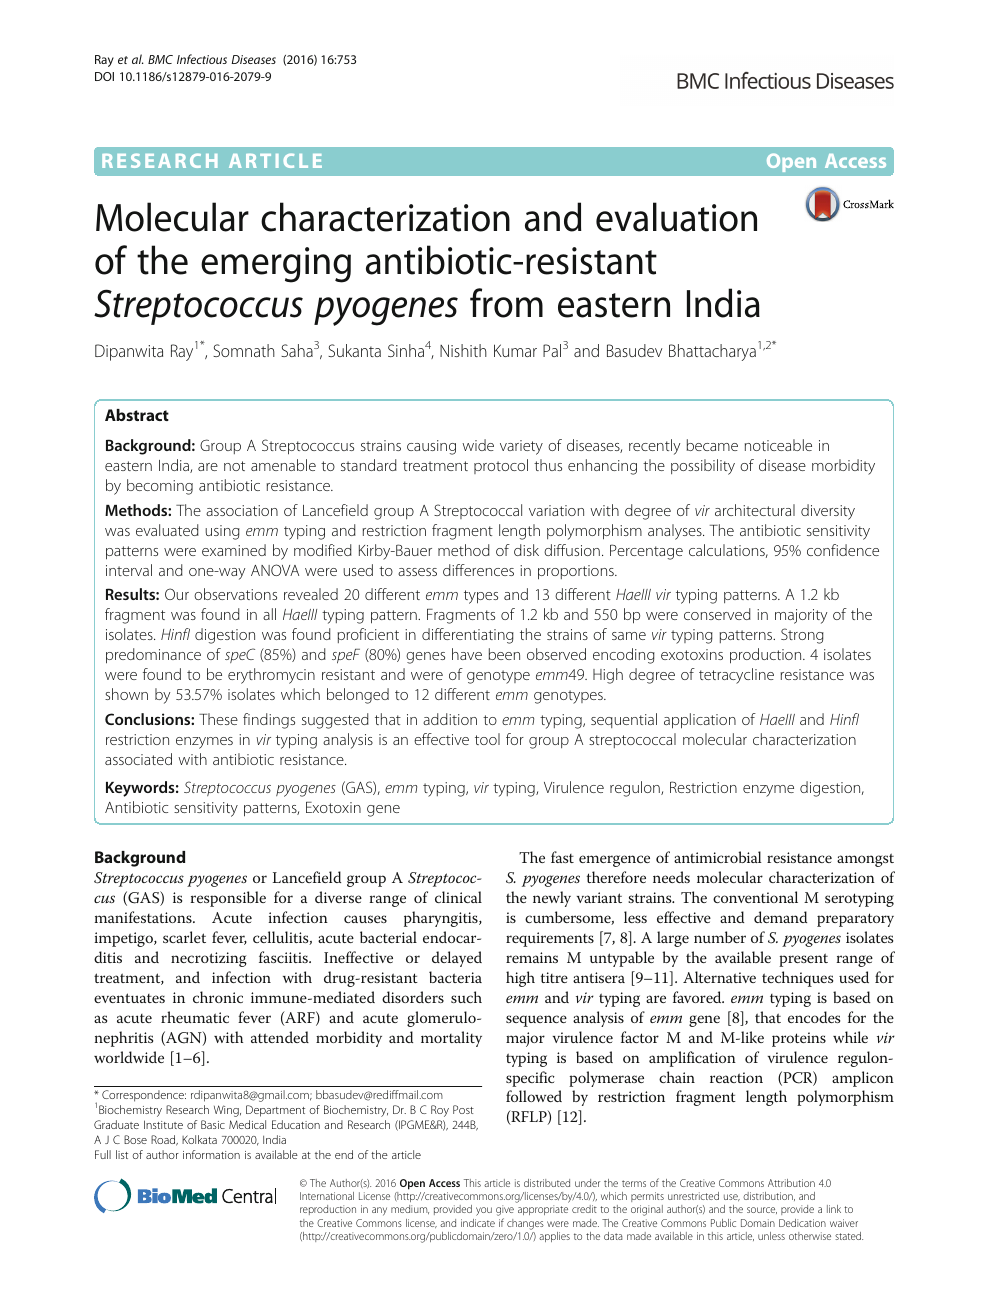 Molecular Characterization And Evaluation Of The Emerging